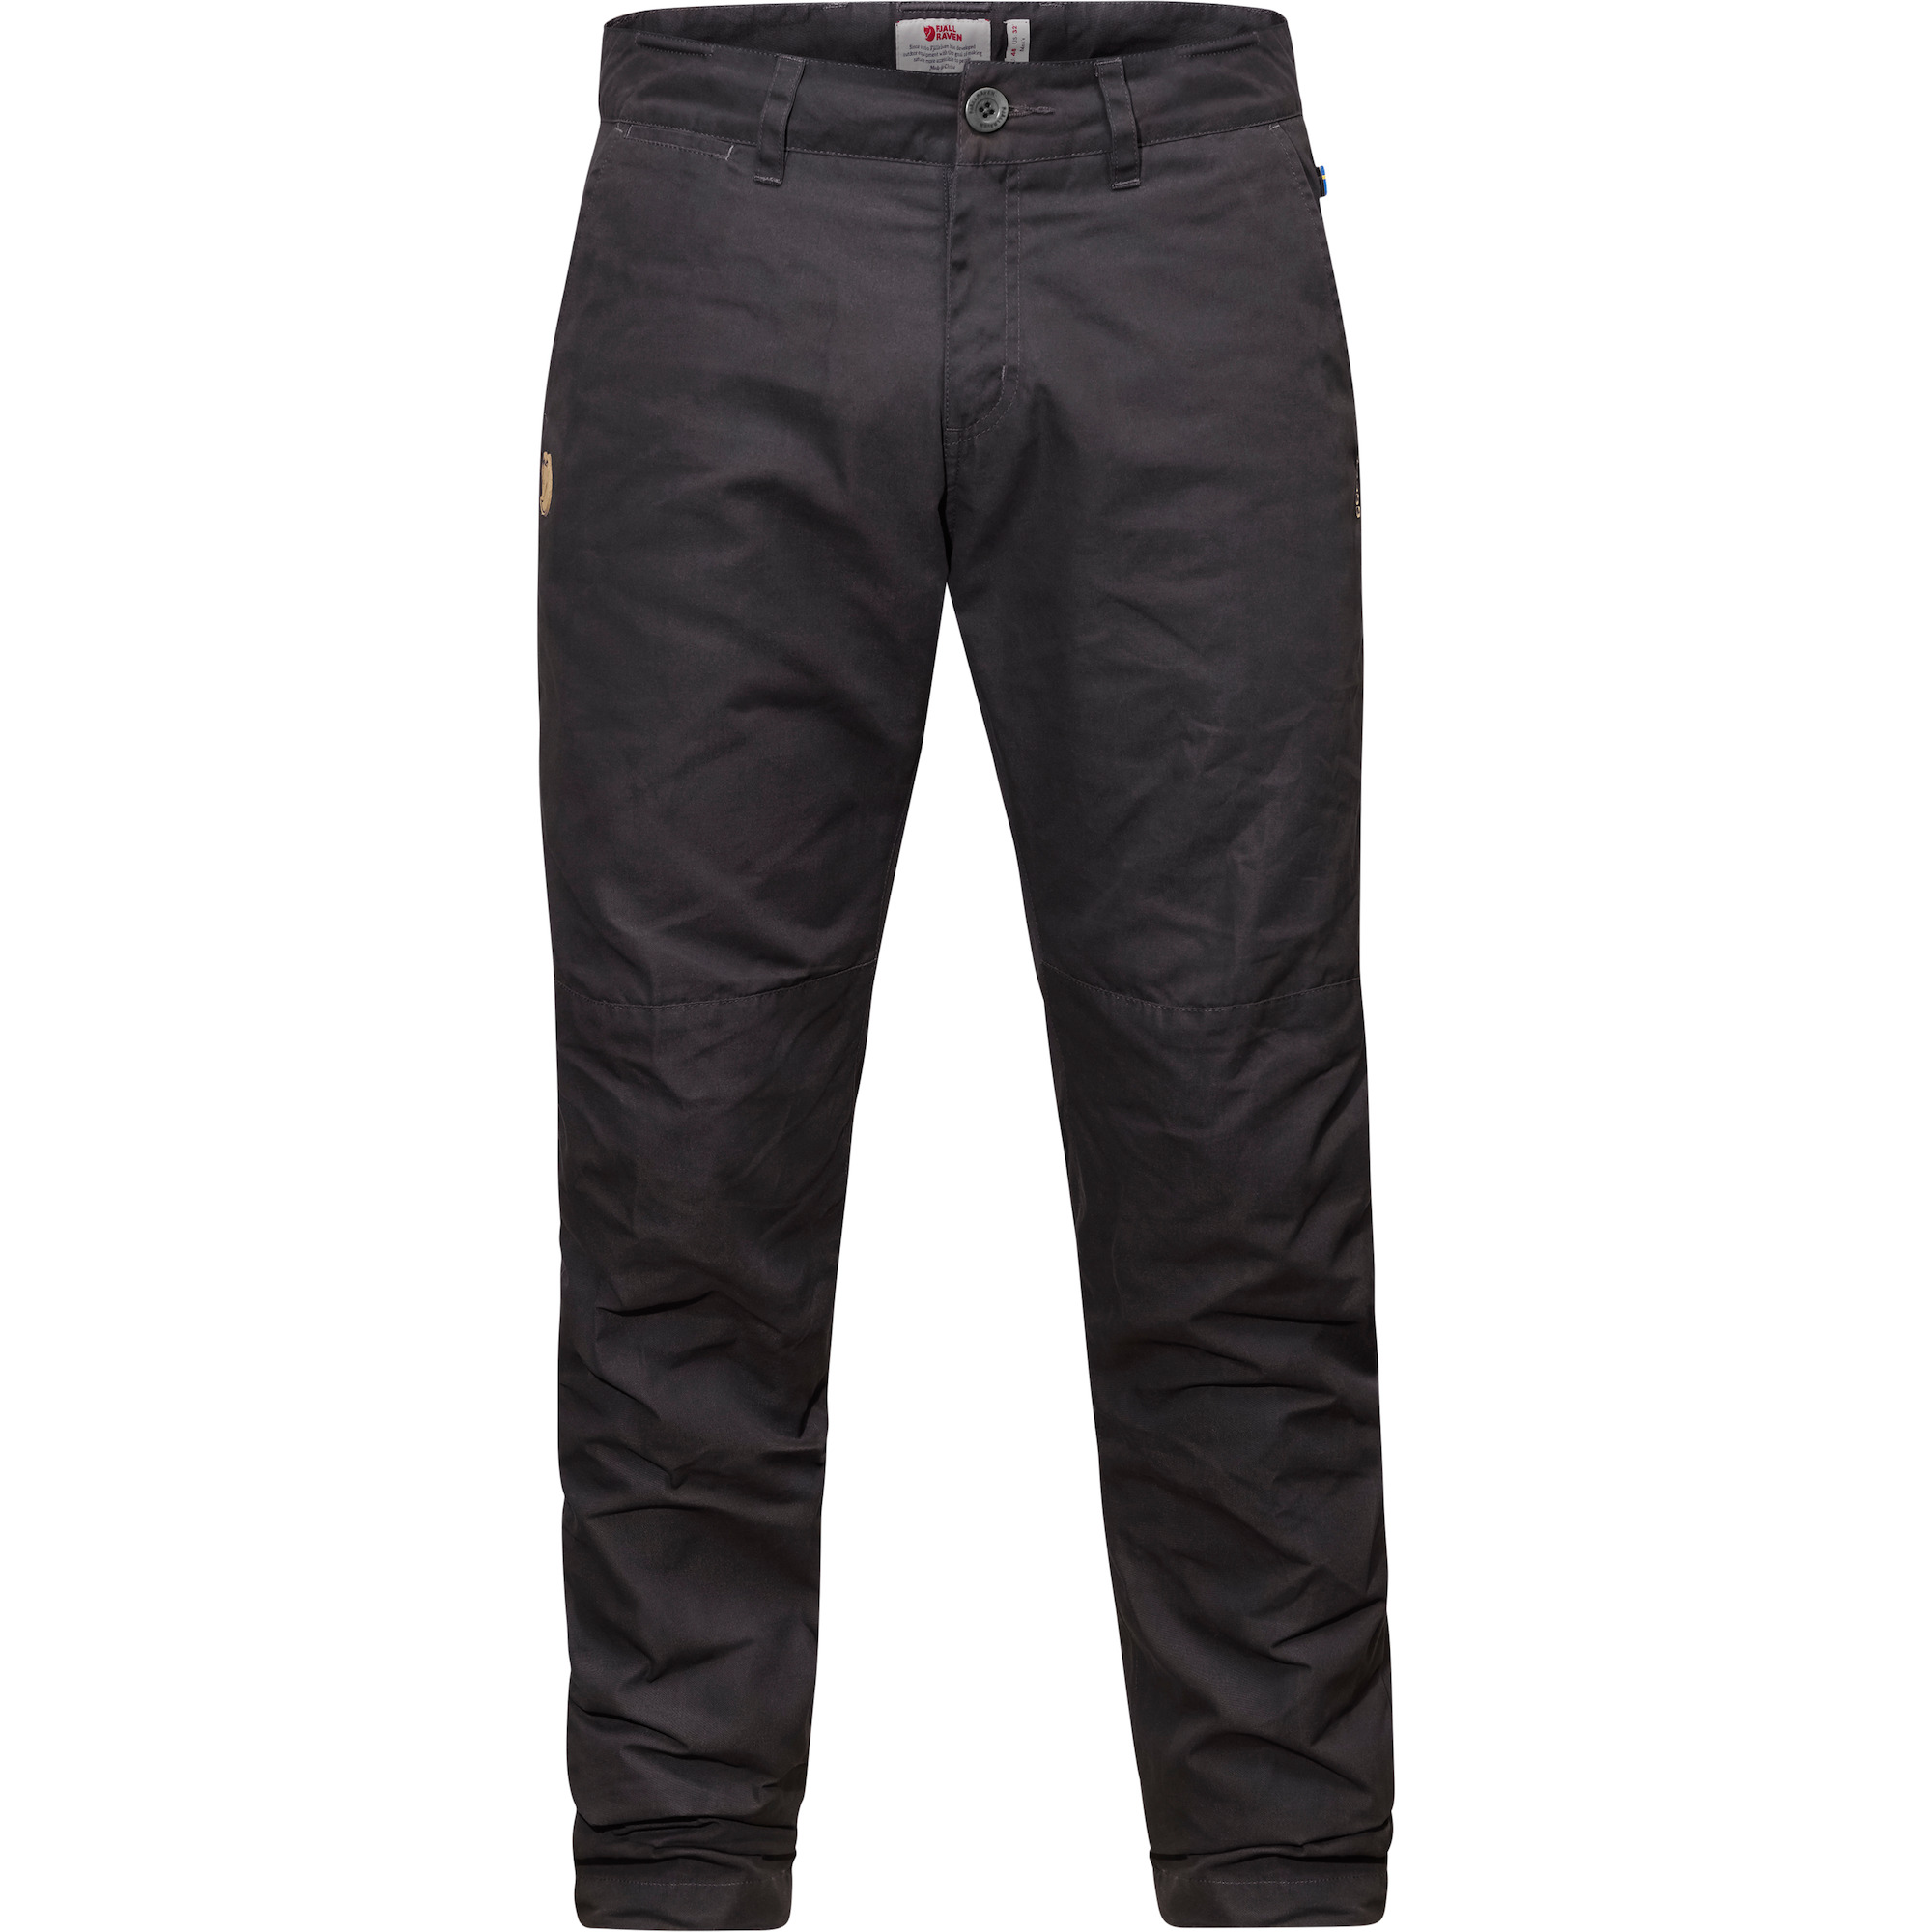 Men's Insulated Trousers